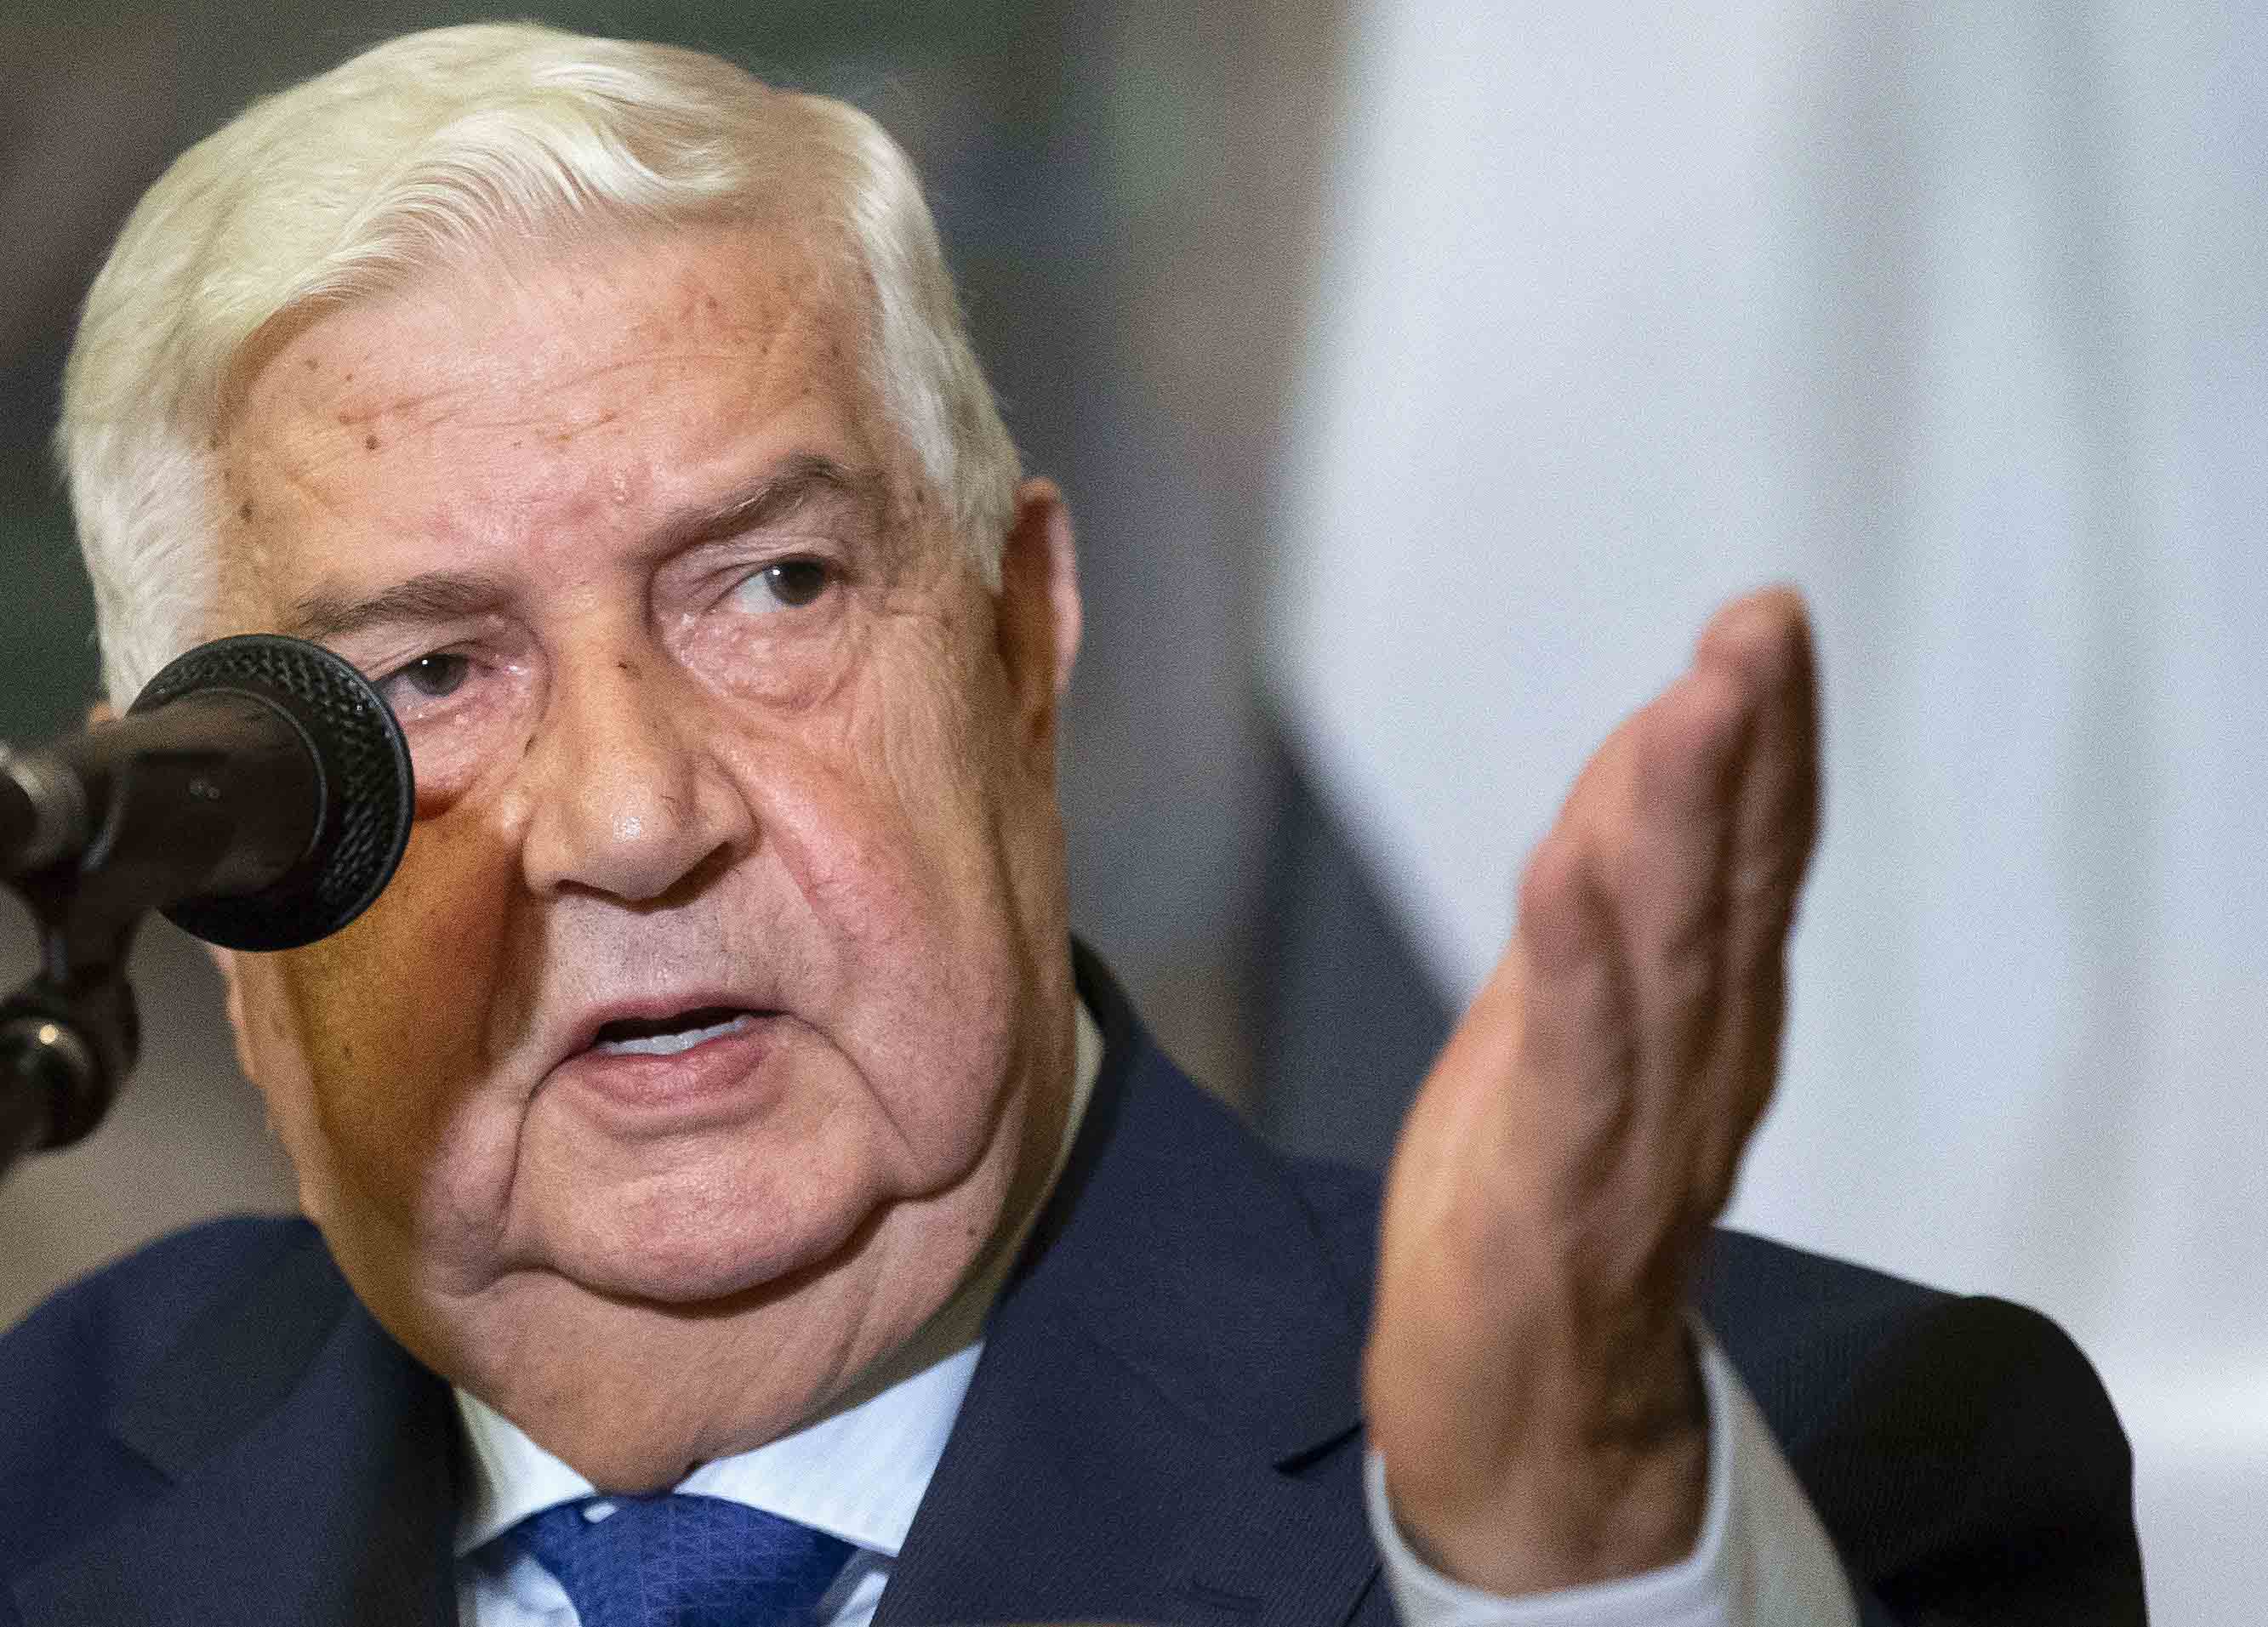 Syrian Foreign Minister Walid Muallem gestures as speaks to the media during the joint news conference with Russian Foreign Minister Sergey Lavrov, following their talks, in Moscow, Russia, Thursday, Aug. 30, 2018